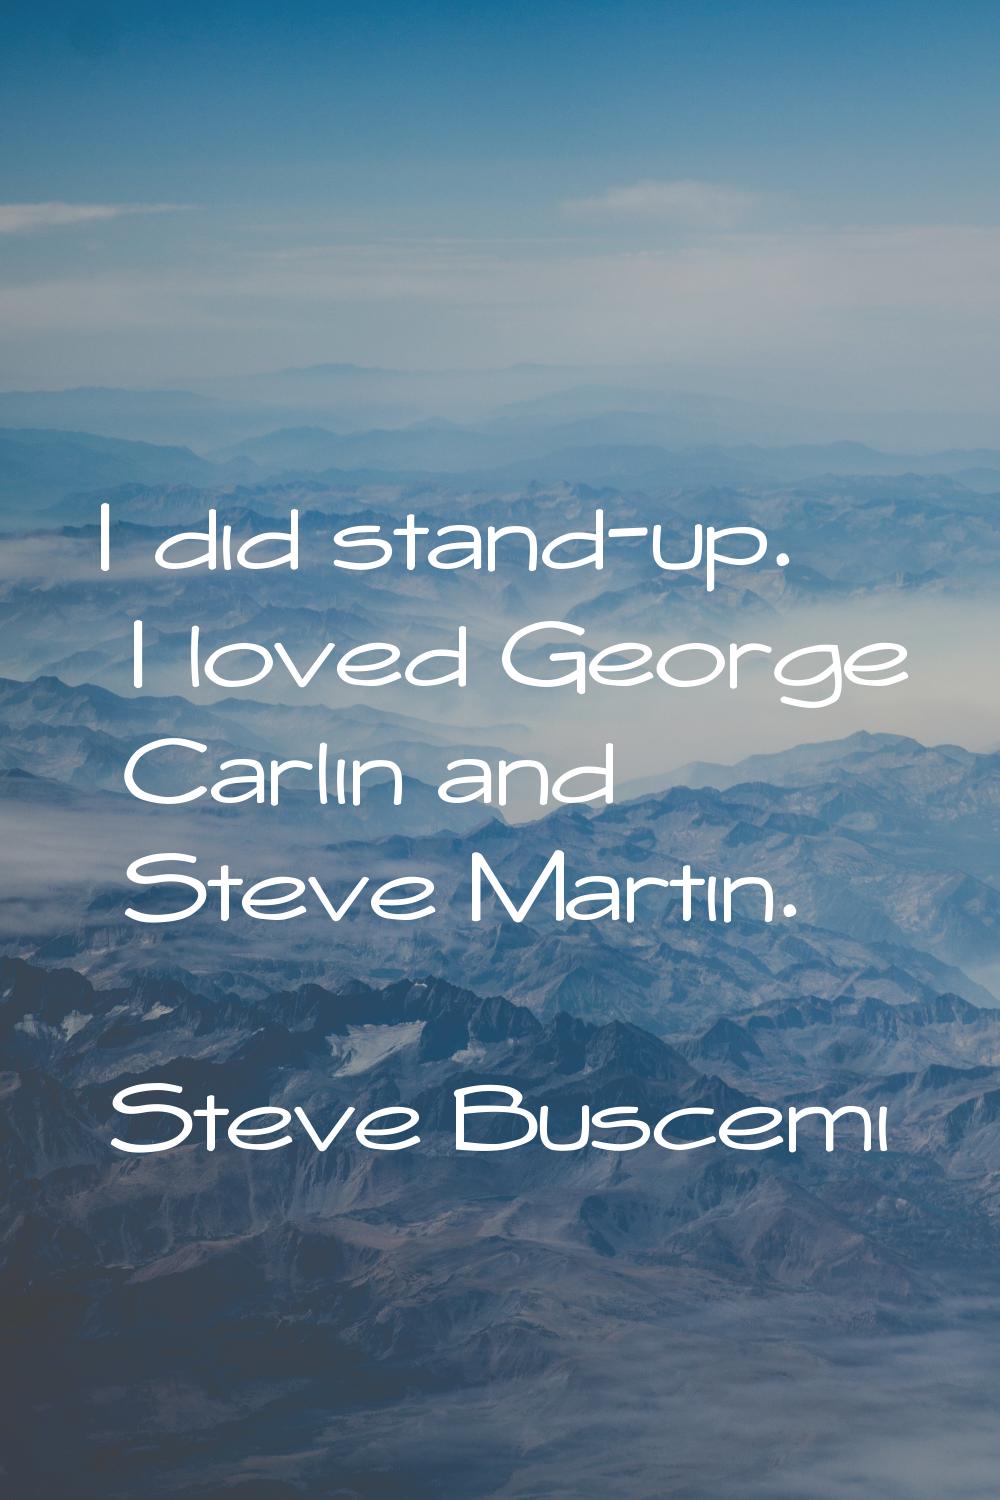 I did stand-up. I loved George Carlin and Steve Martin.